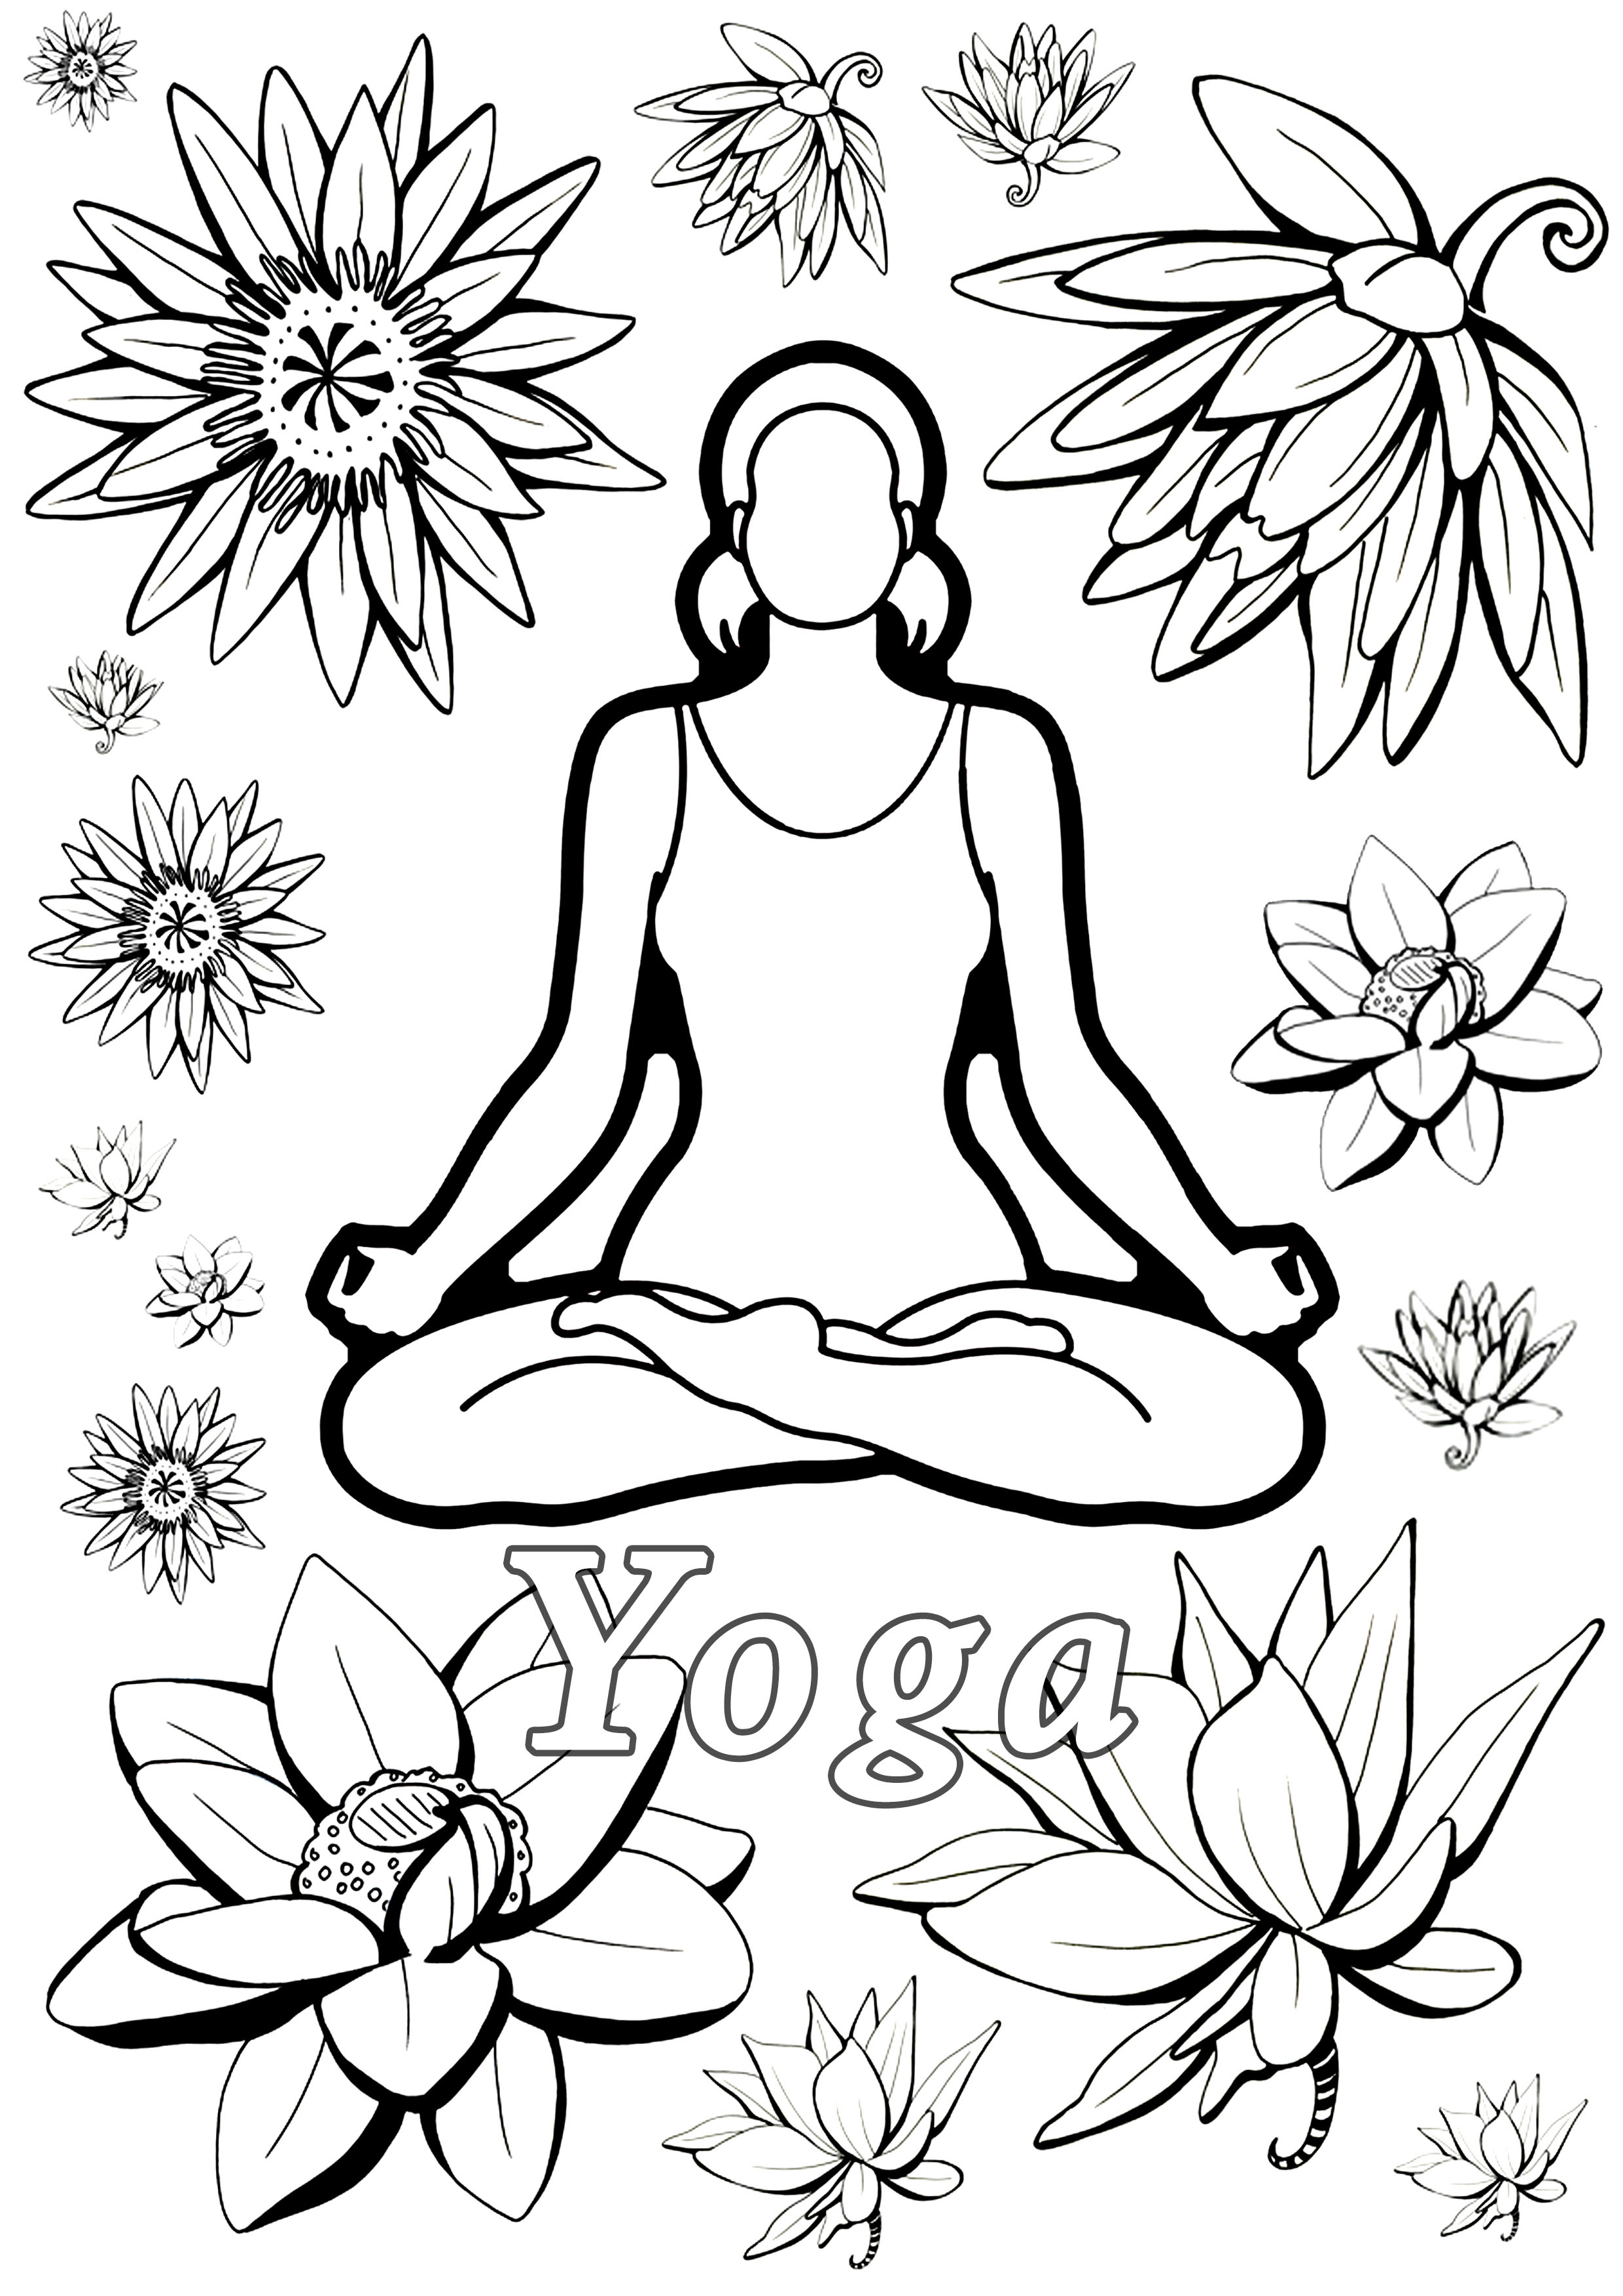 Keep calm and do Yoga ! - Anti stress Adult Coloring Pages